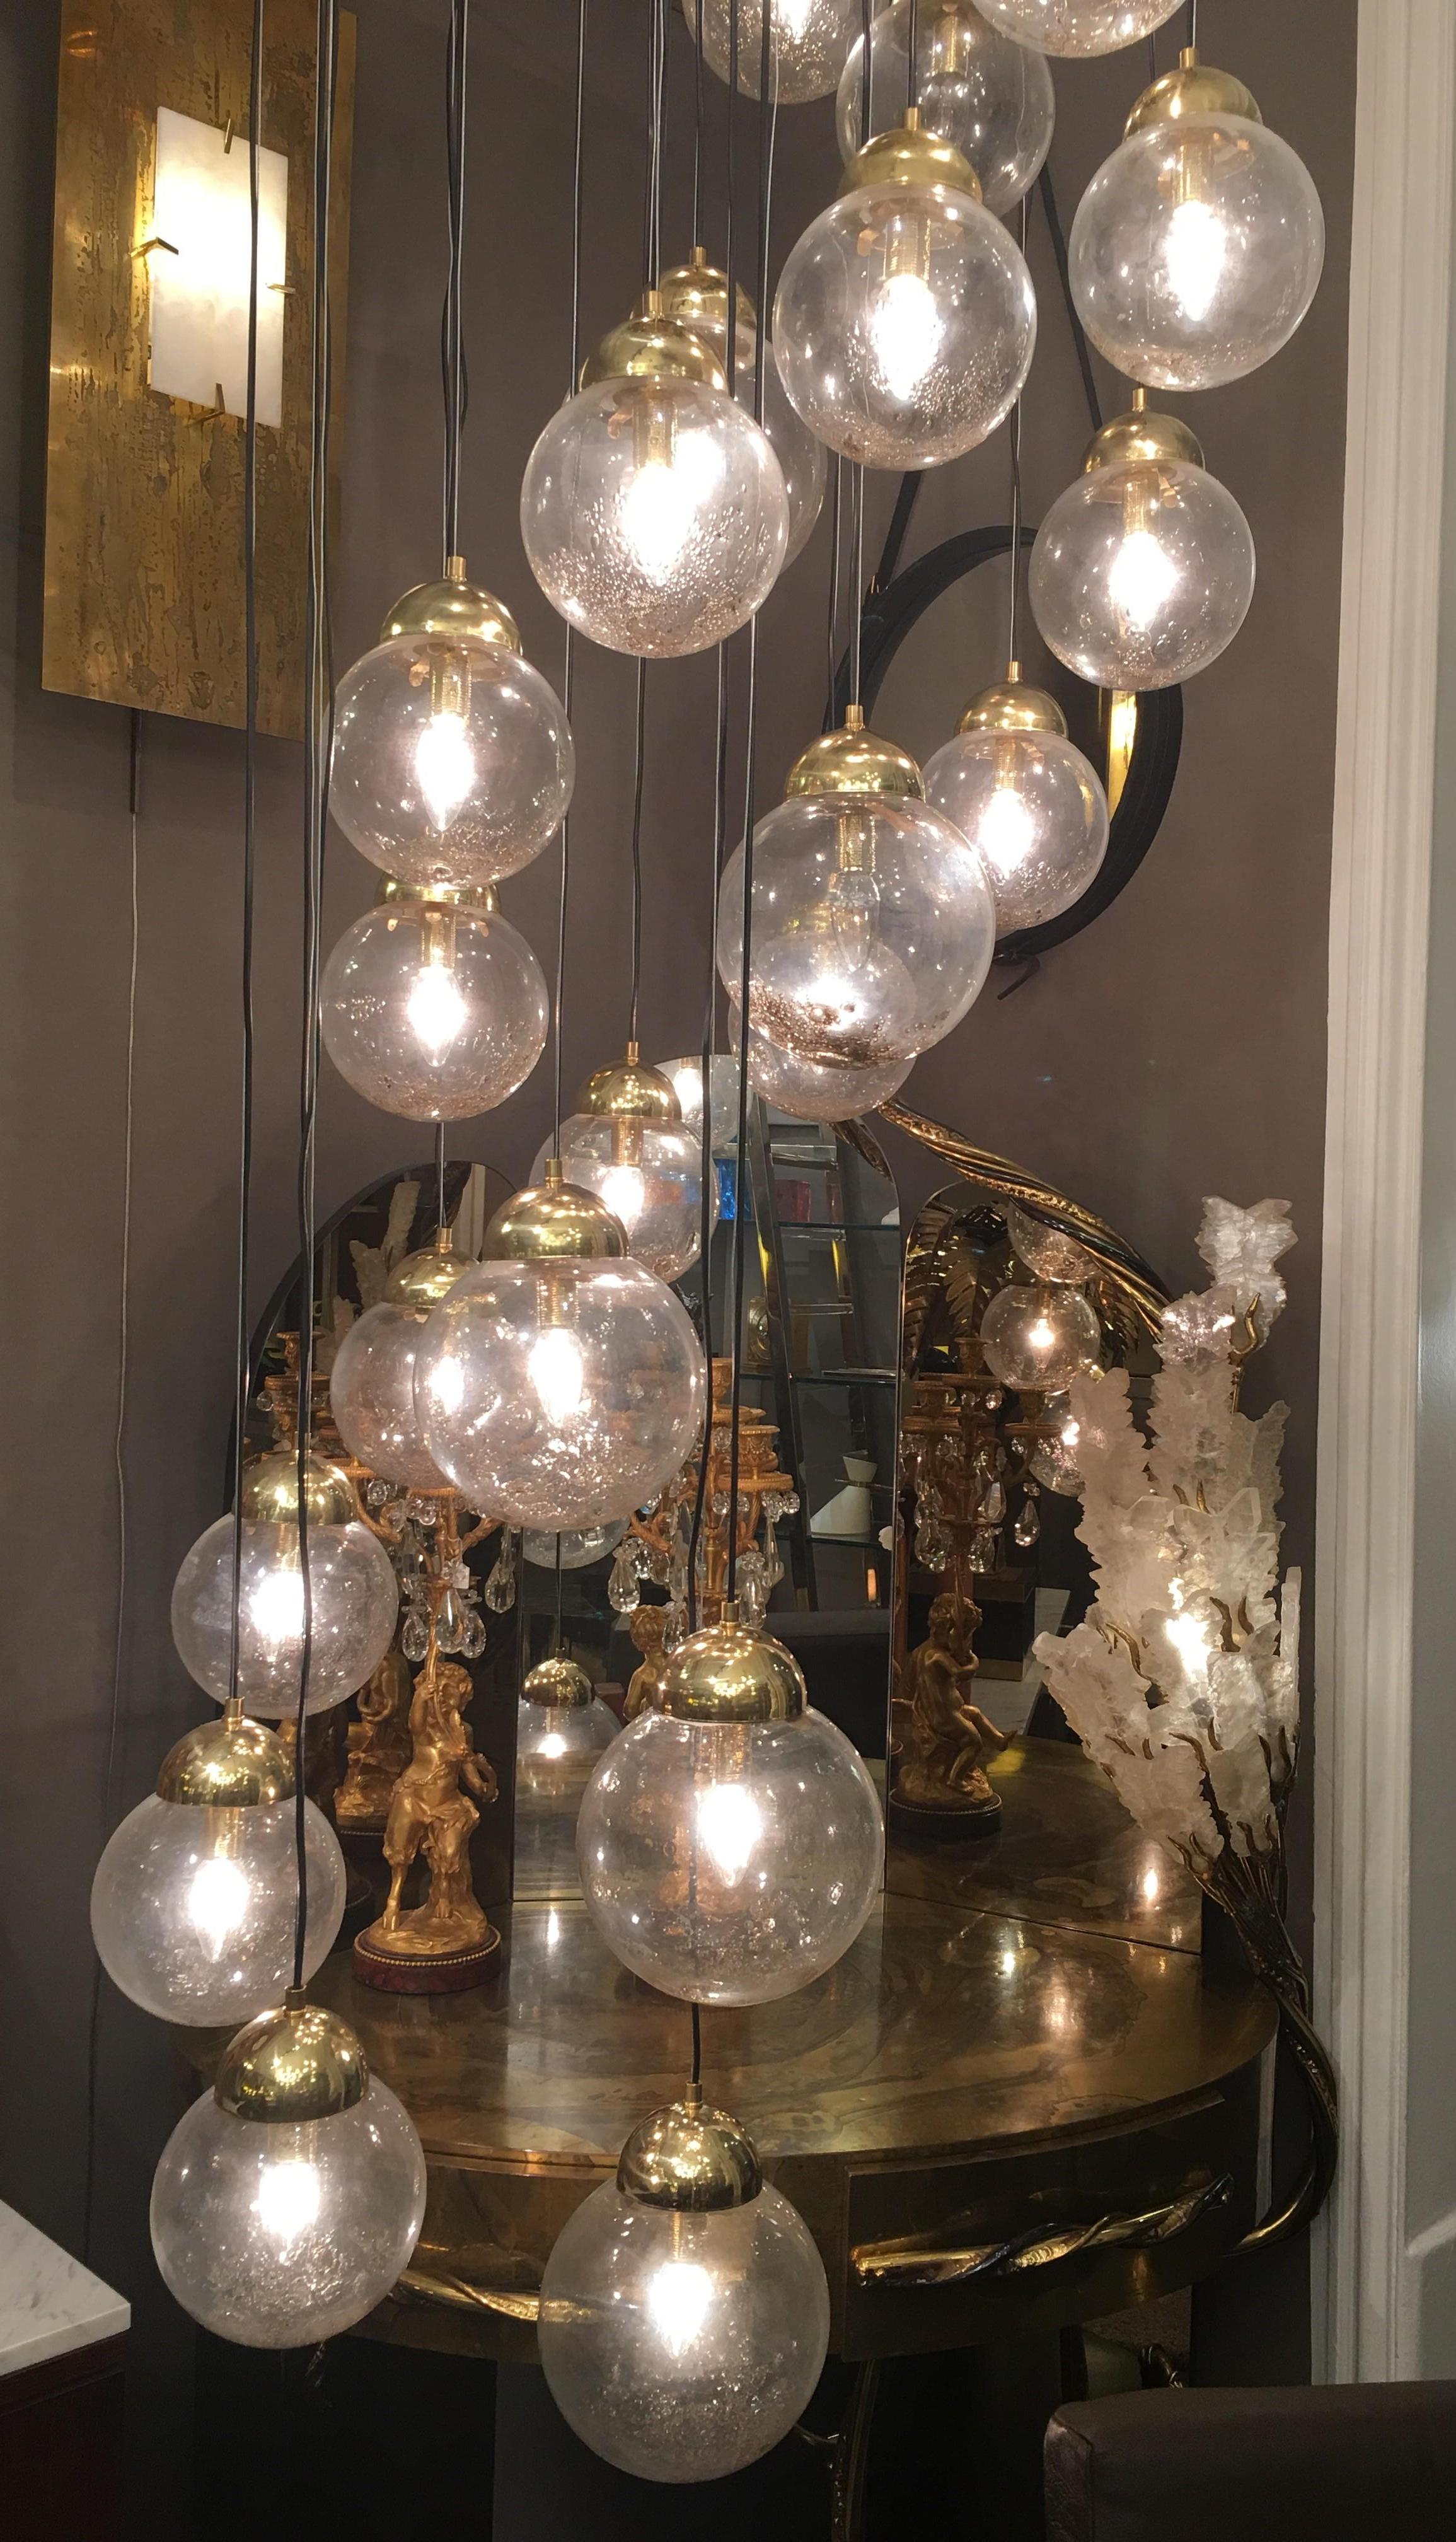 Large Murano suspension, consisting of 24 globes in blown transparent glass with inclusions of amber / gold glass in the lower part of the globes, suspended from a polished brass ceiling with steel wires and electric cables. Some globes extra, in